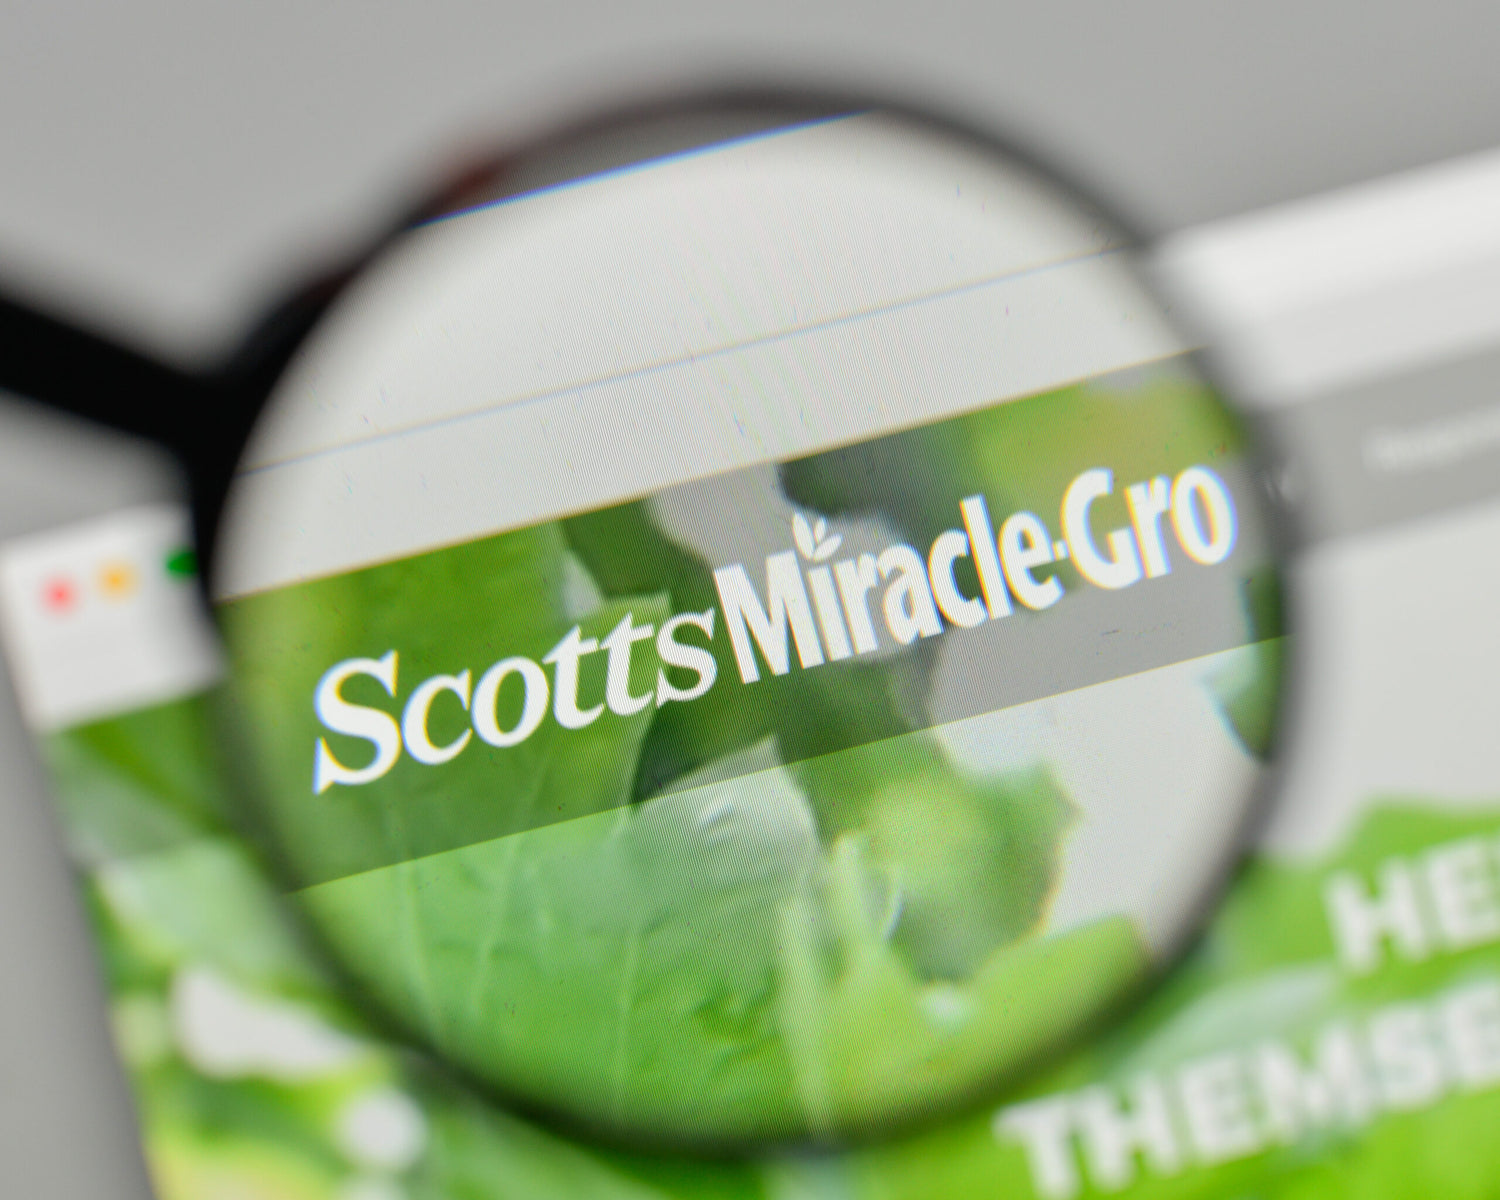 Cannabis Company ScottsMiracle-Gro Invests $150 Million In RIV Capital